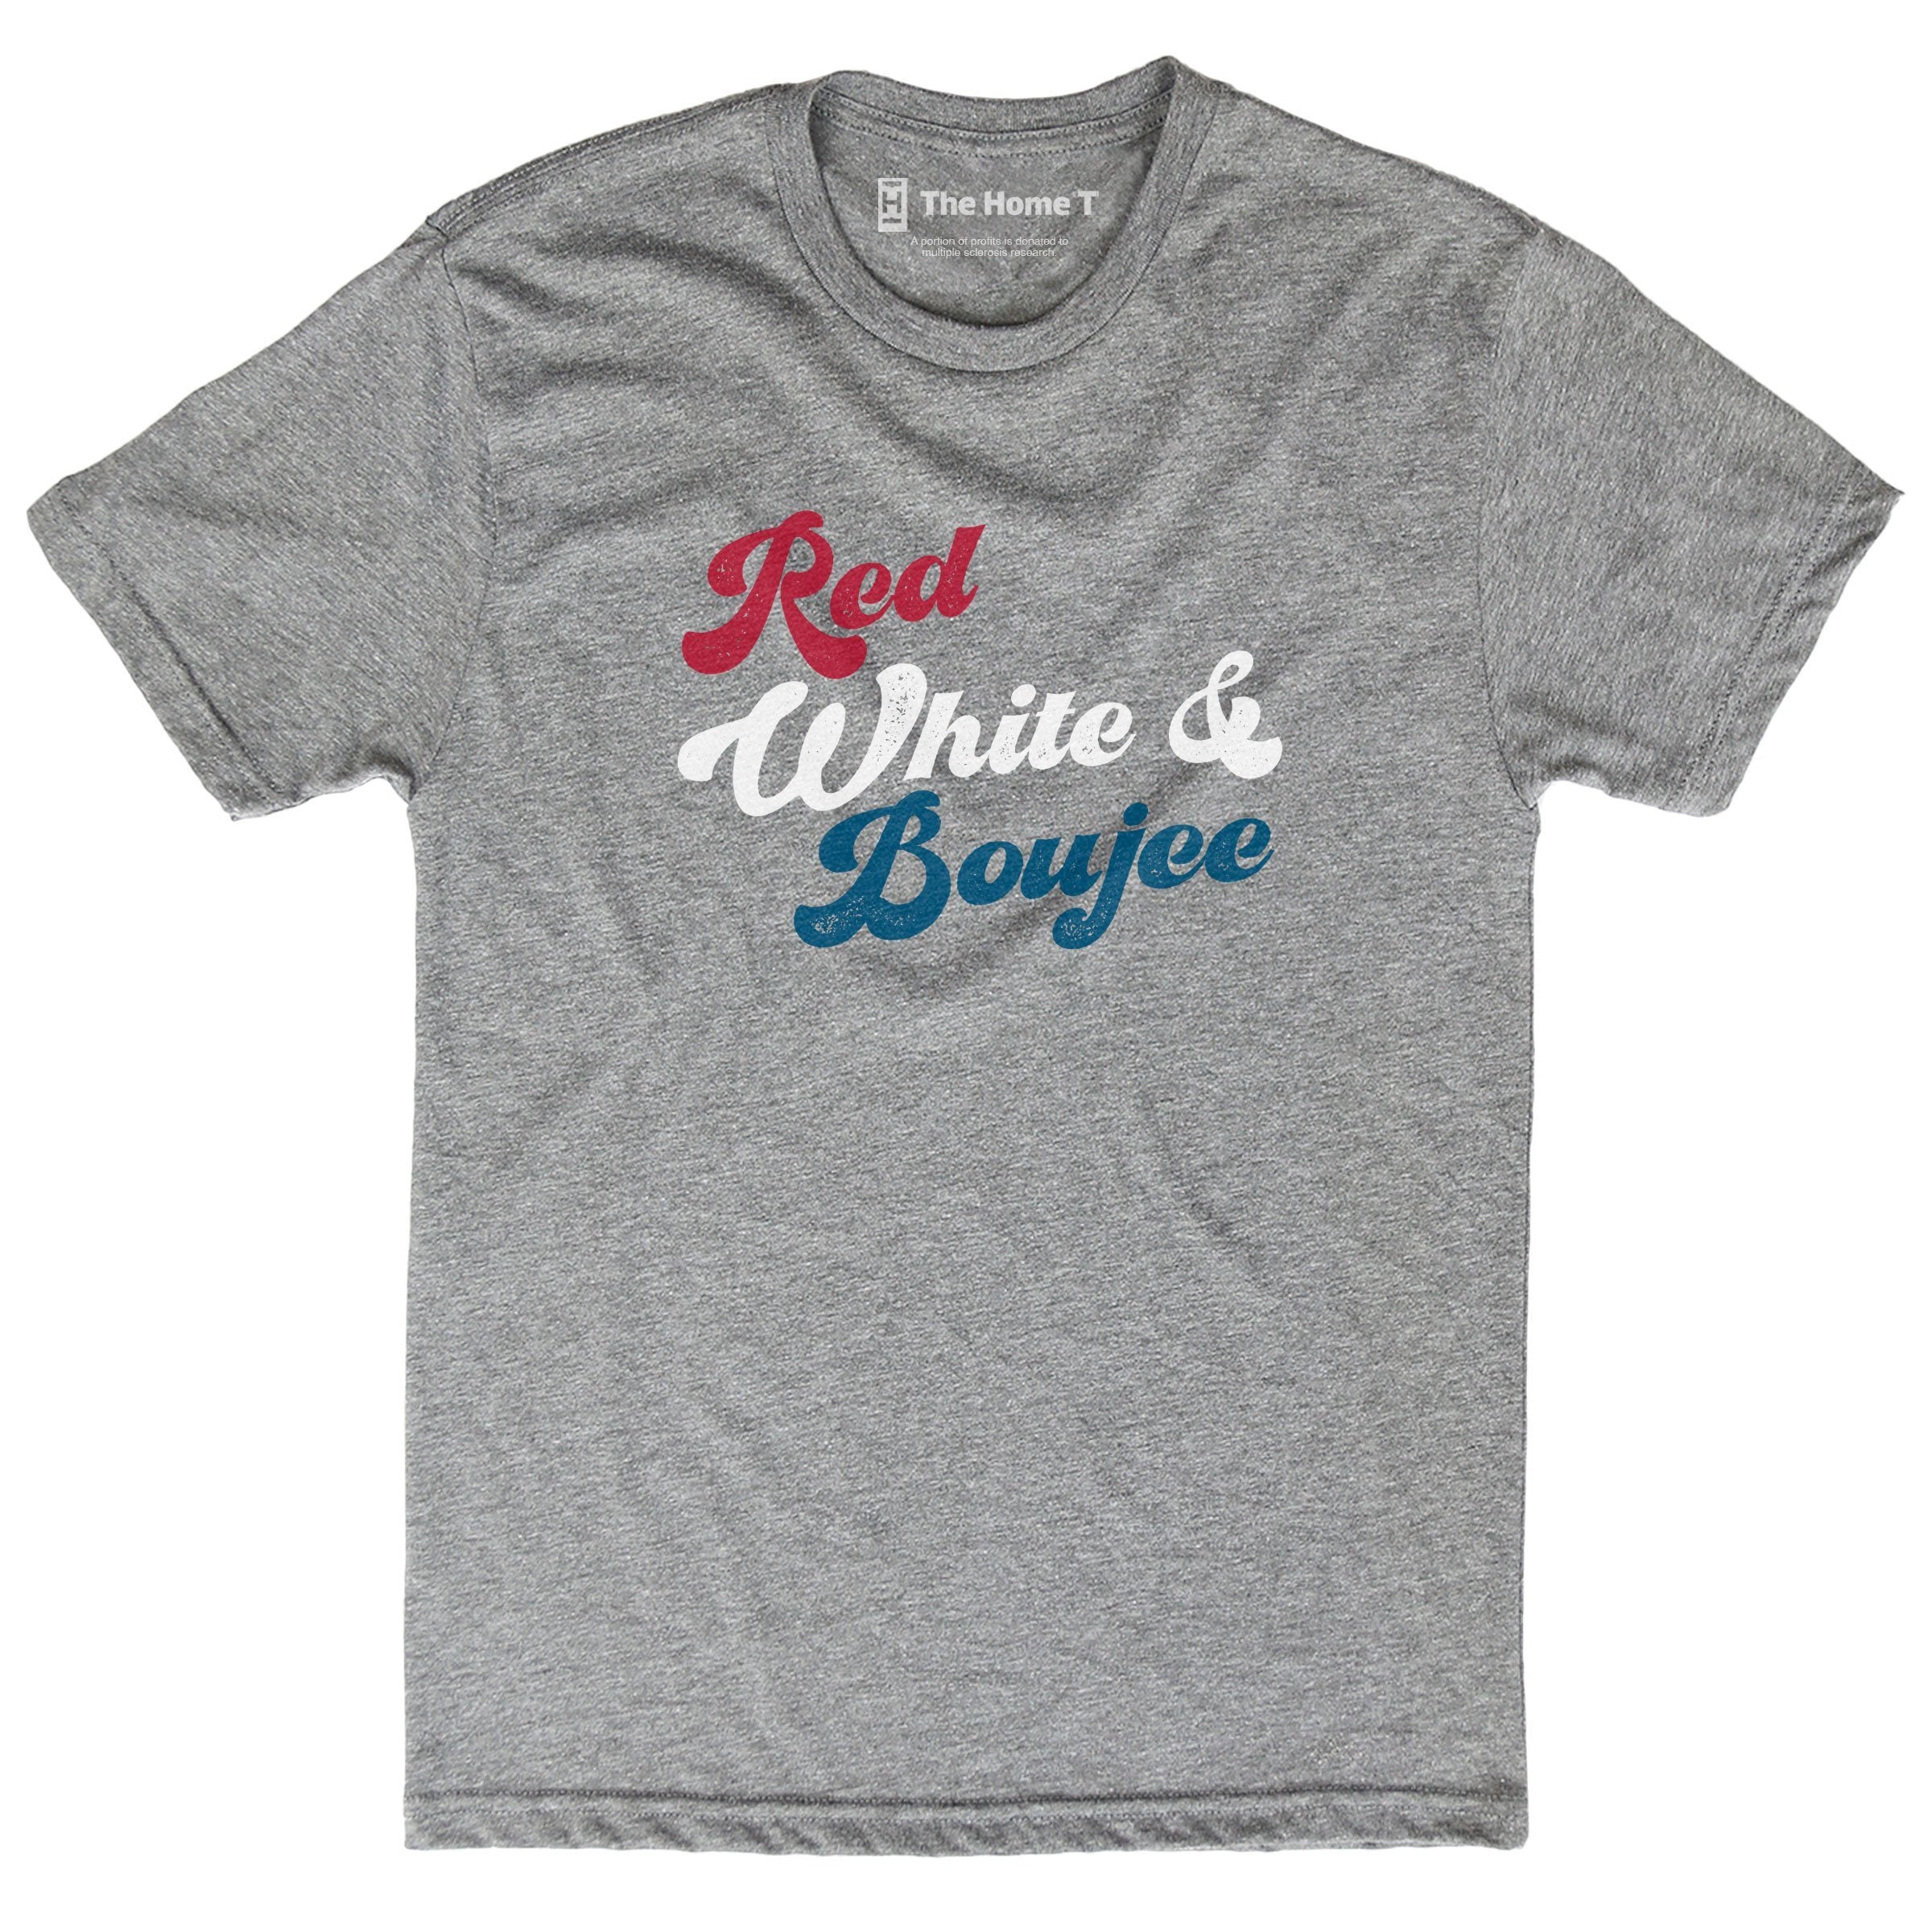 Red, White & Boujee The Home T XS Crew Neck 